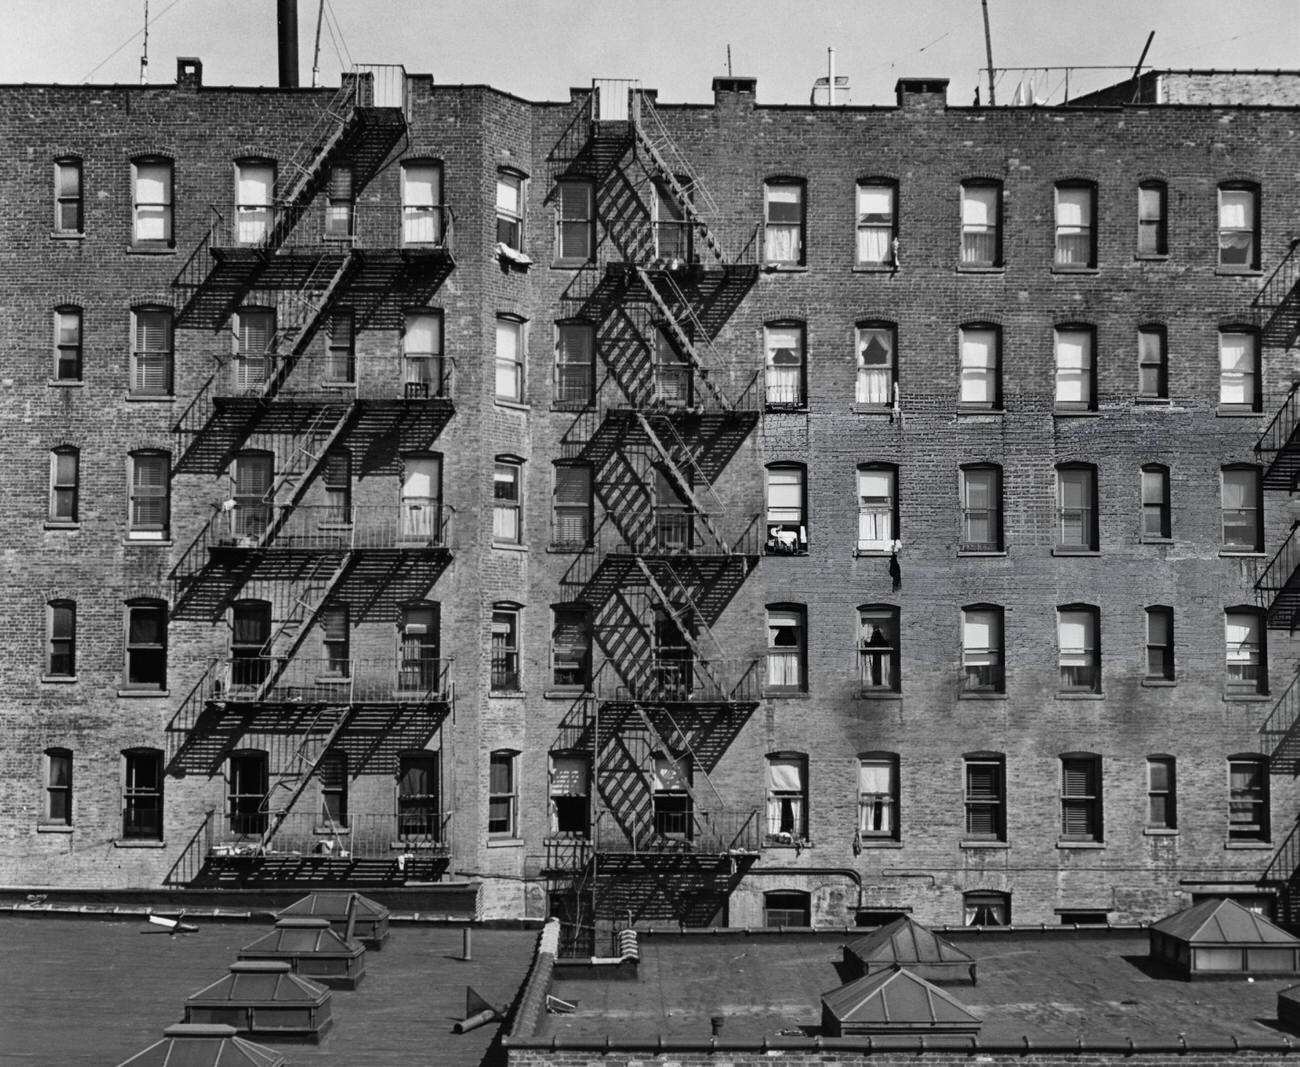 A Tenement Building In The Bronx, 1950.